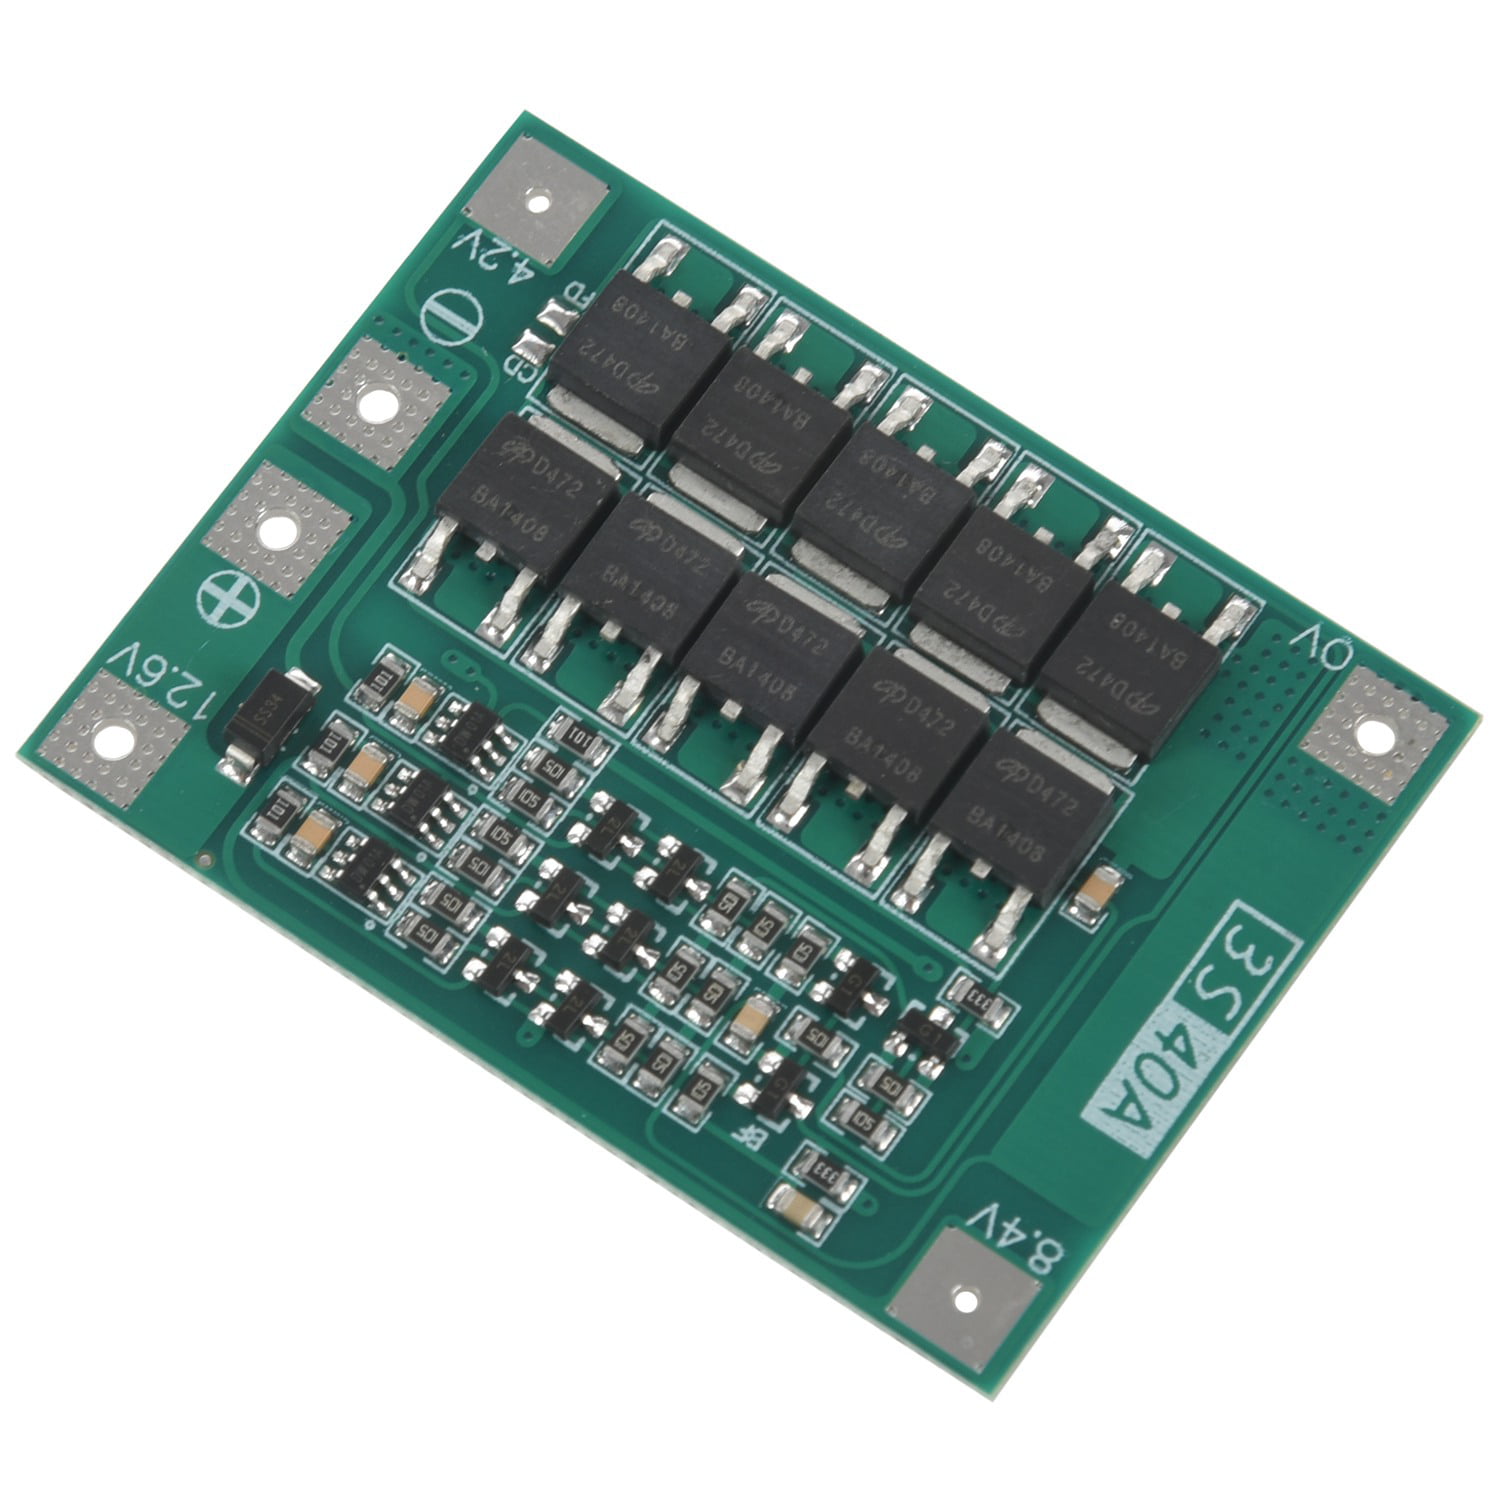 New upgrade 3s/40a bms 11.1v/12.6v 18650 lithium battery protection board  I 